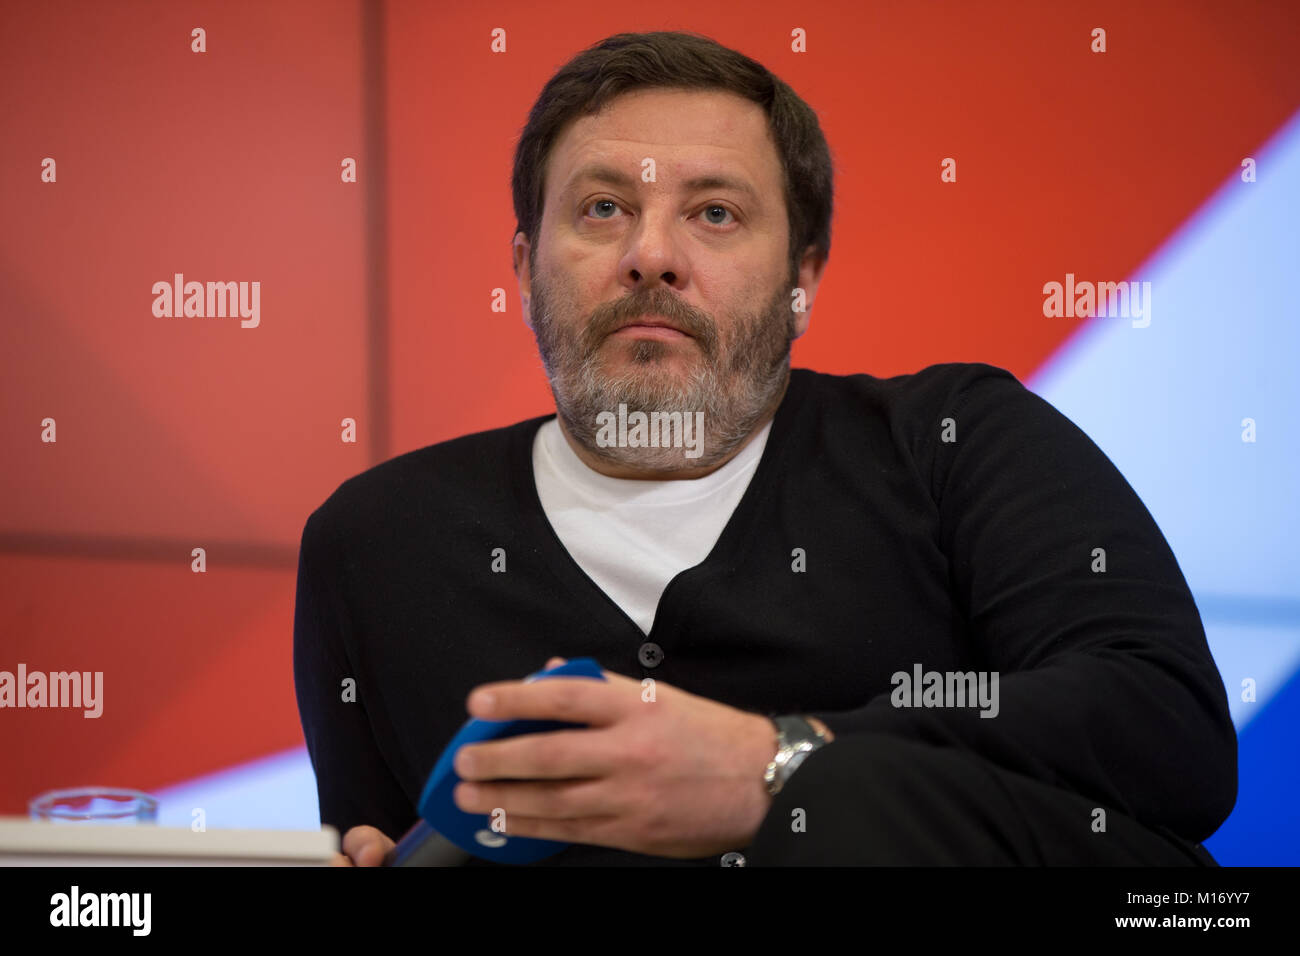 Moscow, Russia. 25th January, 2018. Author and scriptwriter Sergei Minayev at a news conference ahead of the press-preview of the Selfie film at the Rossiya Segodnya news agency's international multimedia press center. Credit: Victor Vytolskiy/Alamy Live News Stock Photo